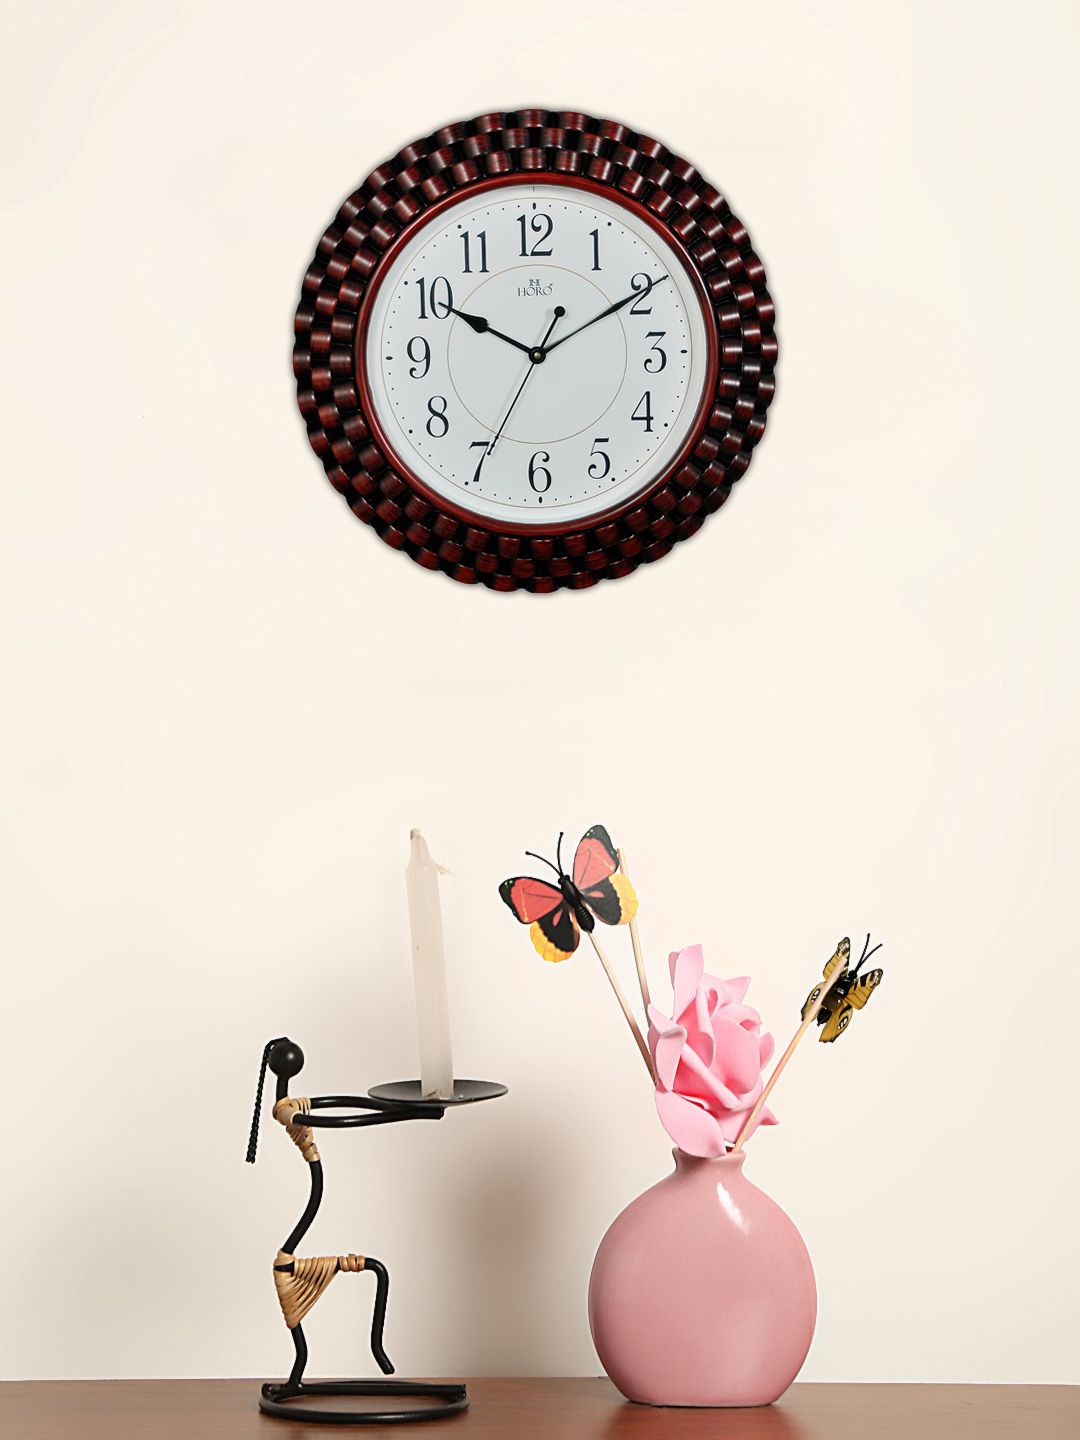 Horo White Handcrafted Geometric Solid Analogue Wall Clock Price in India